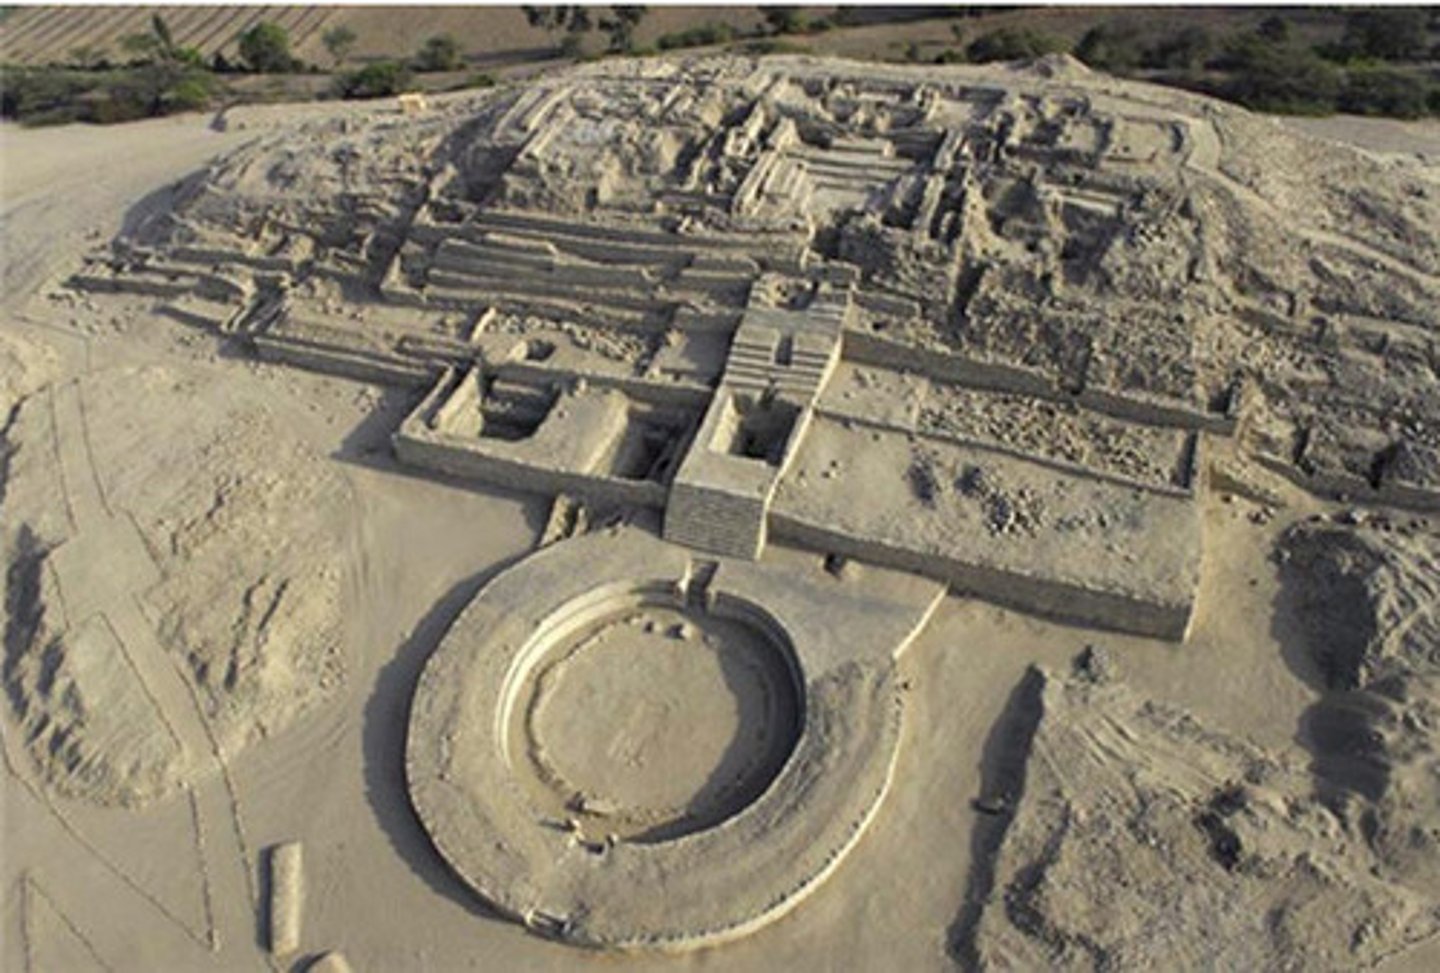 <p>A region along the coast of Peru that possessed a highly-developed urban culture as early as 2500 B.C.E. Characterized by massive stepped pyramids and extensive use of cotton.</p>